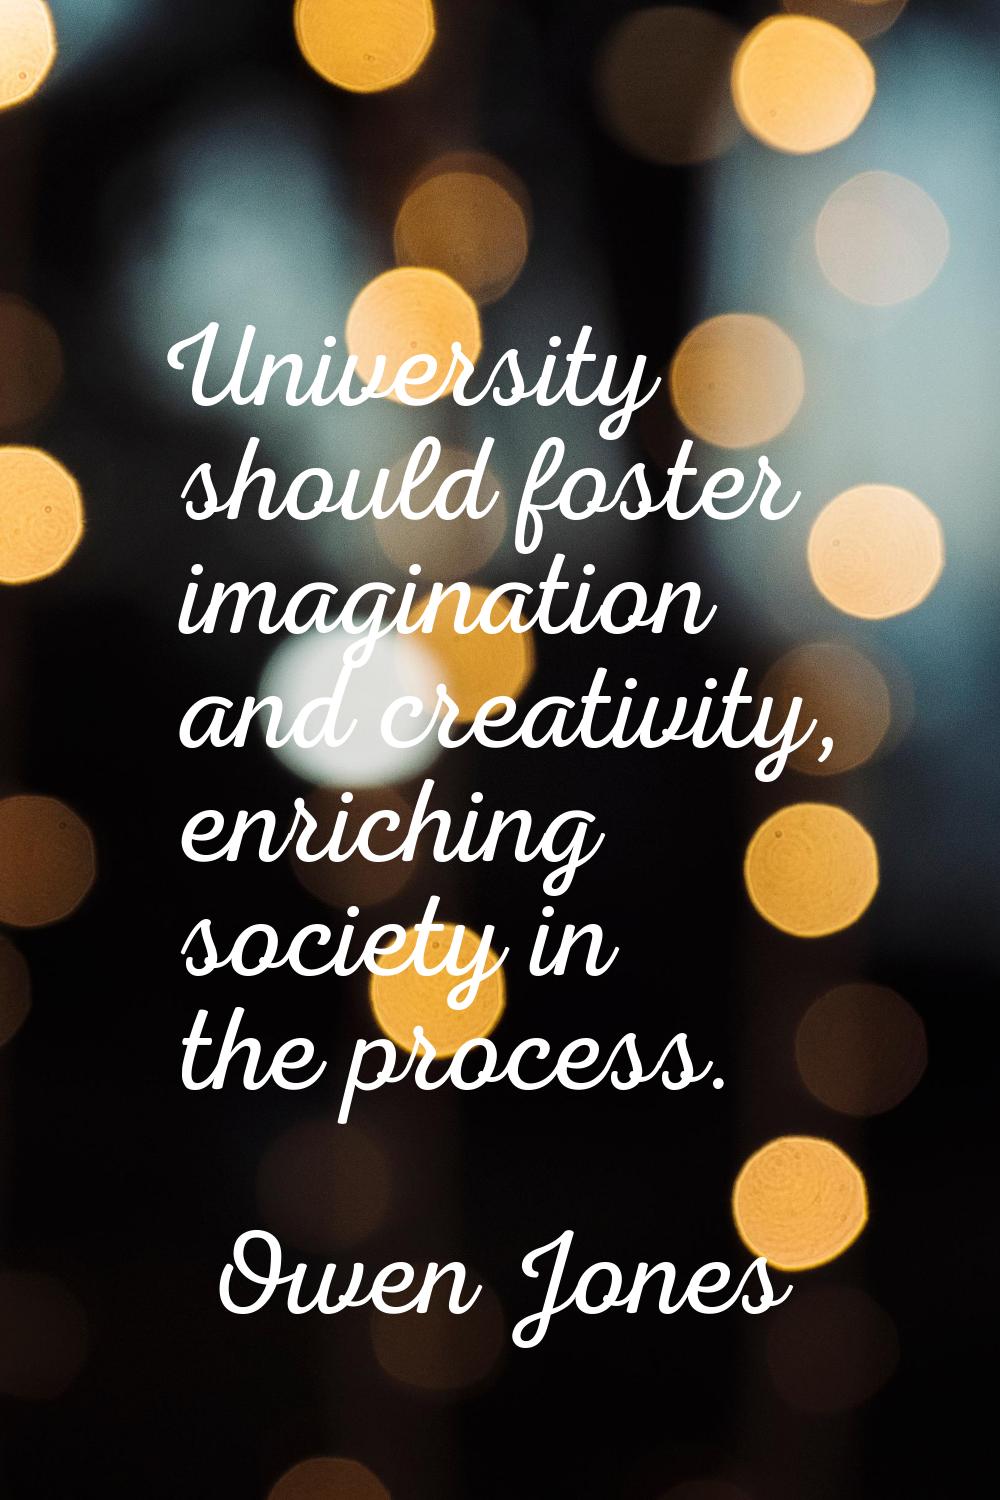 University should foster imagination and creativity, enriching society in the process.